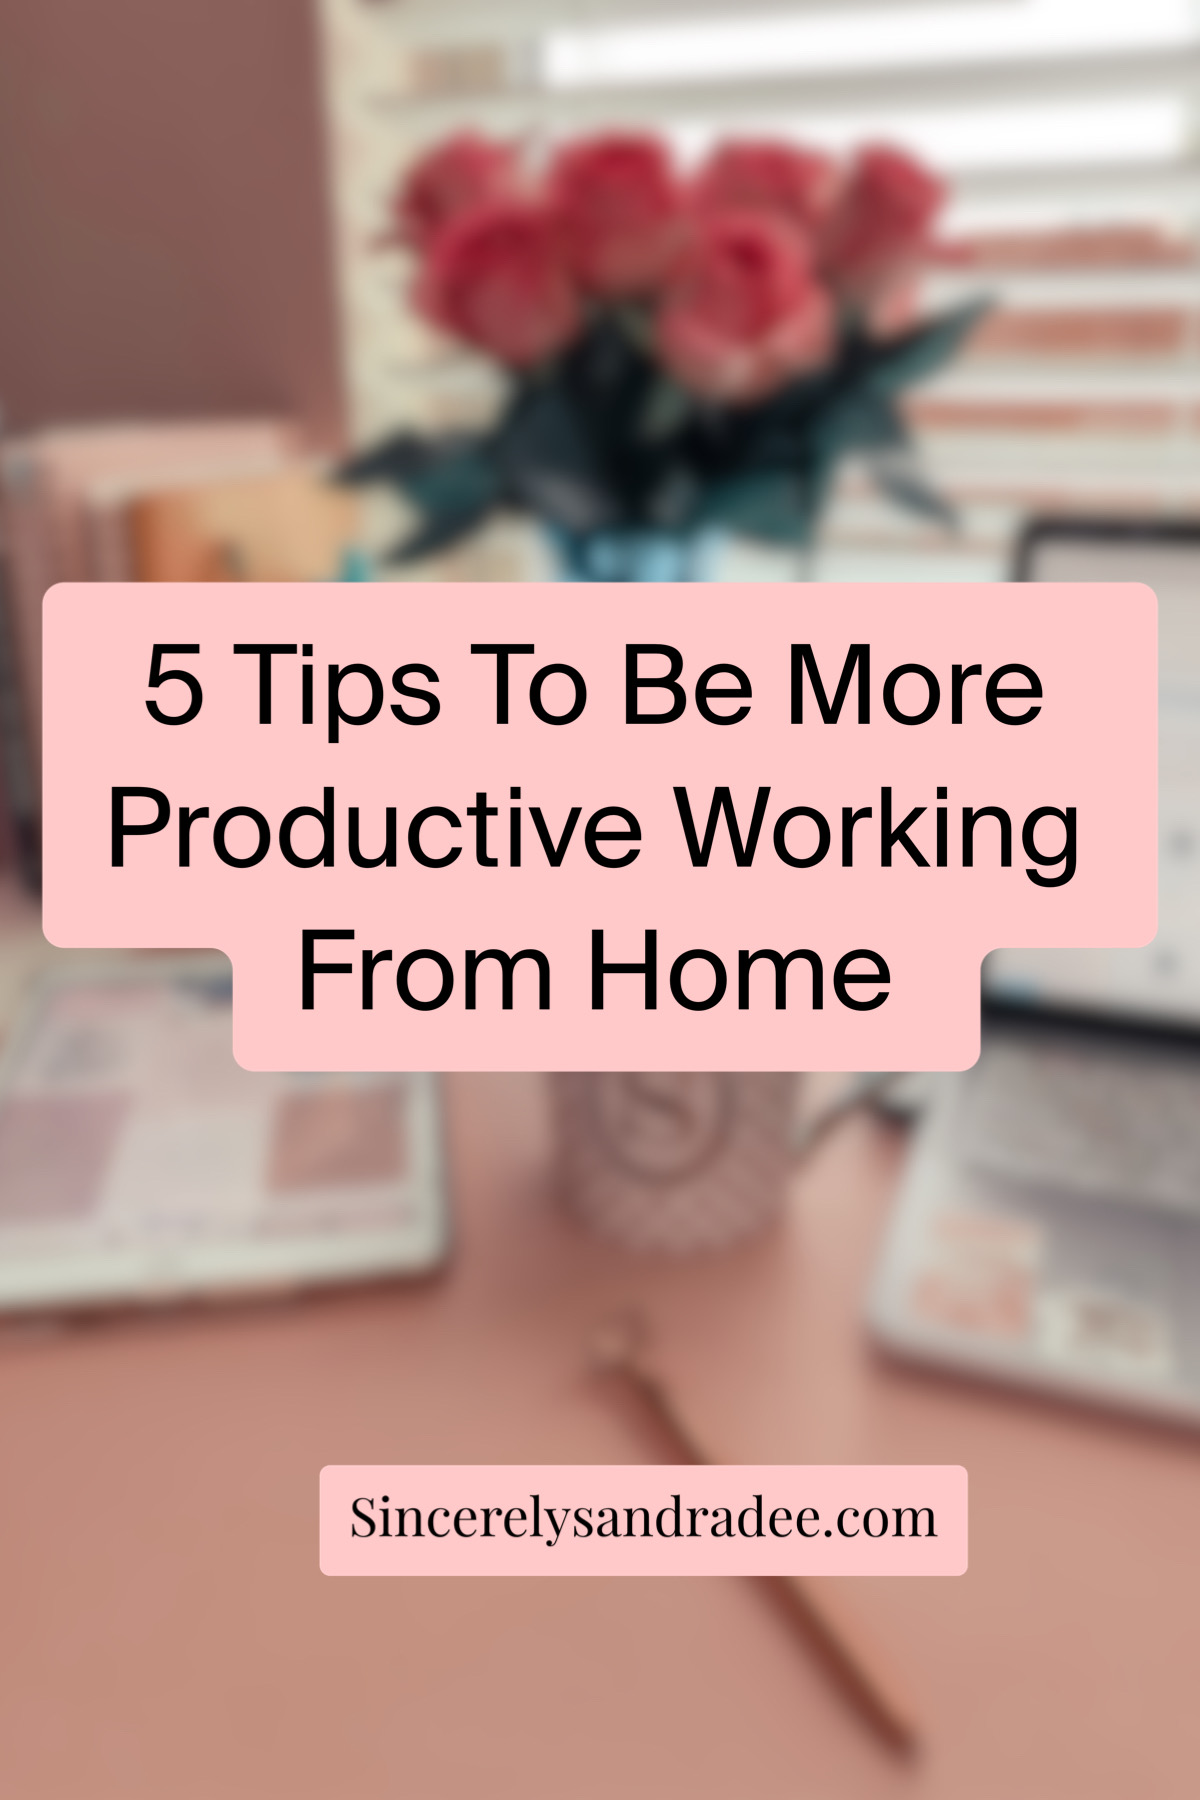 5 Tips To Be More Productive Working From Home